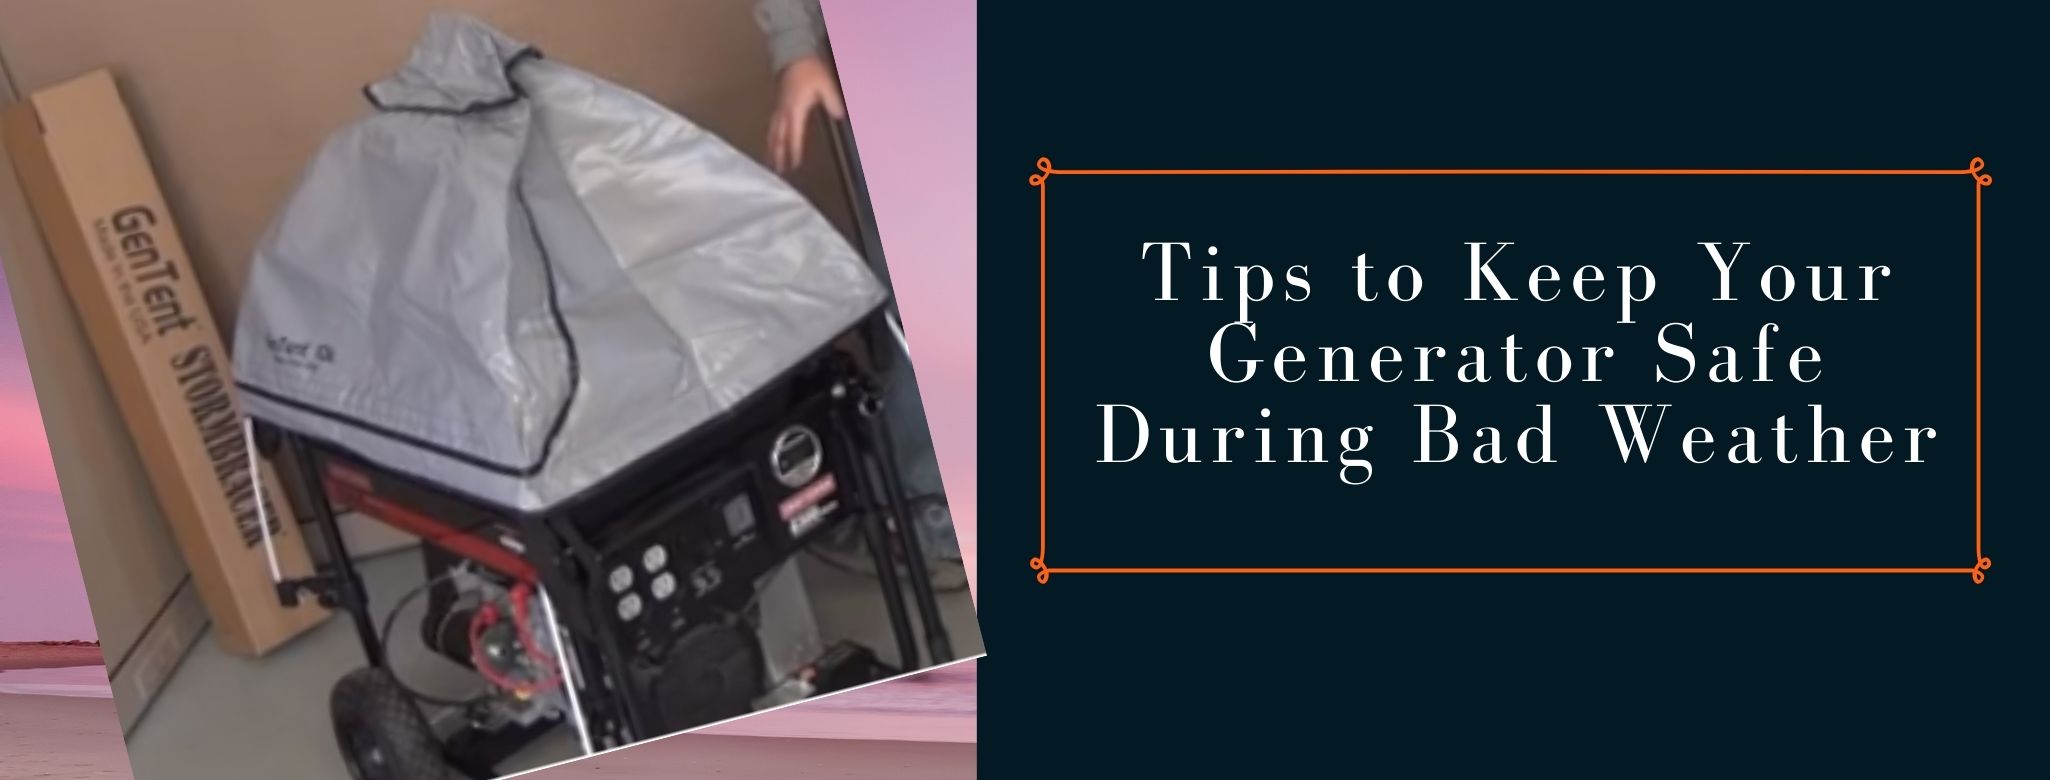 Ways for generator safety during storm, rain and cyclones.